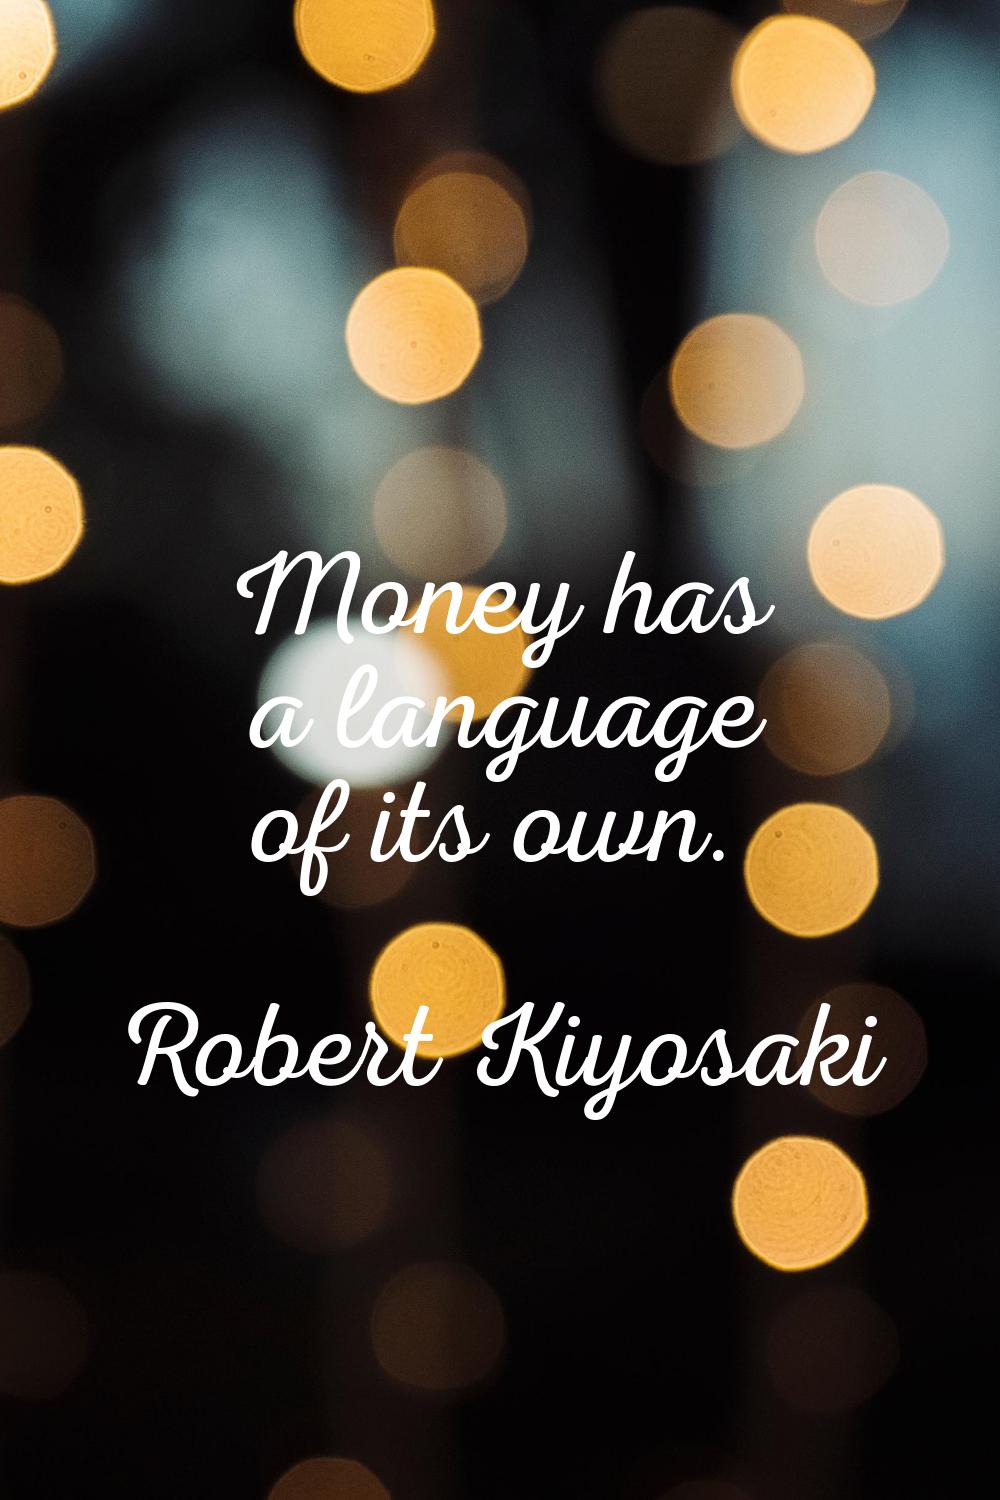 Money has a language of its own.